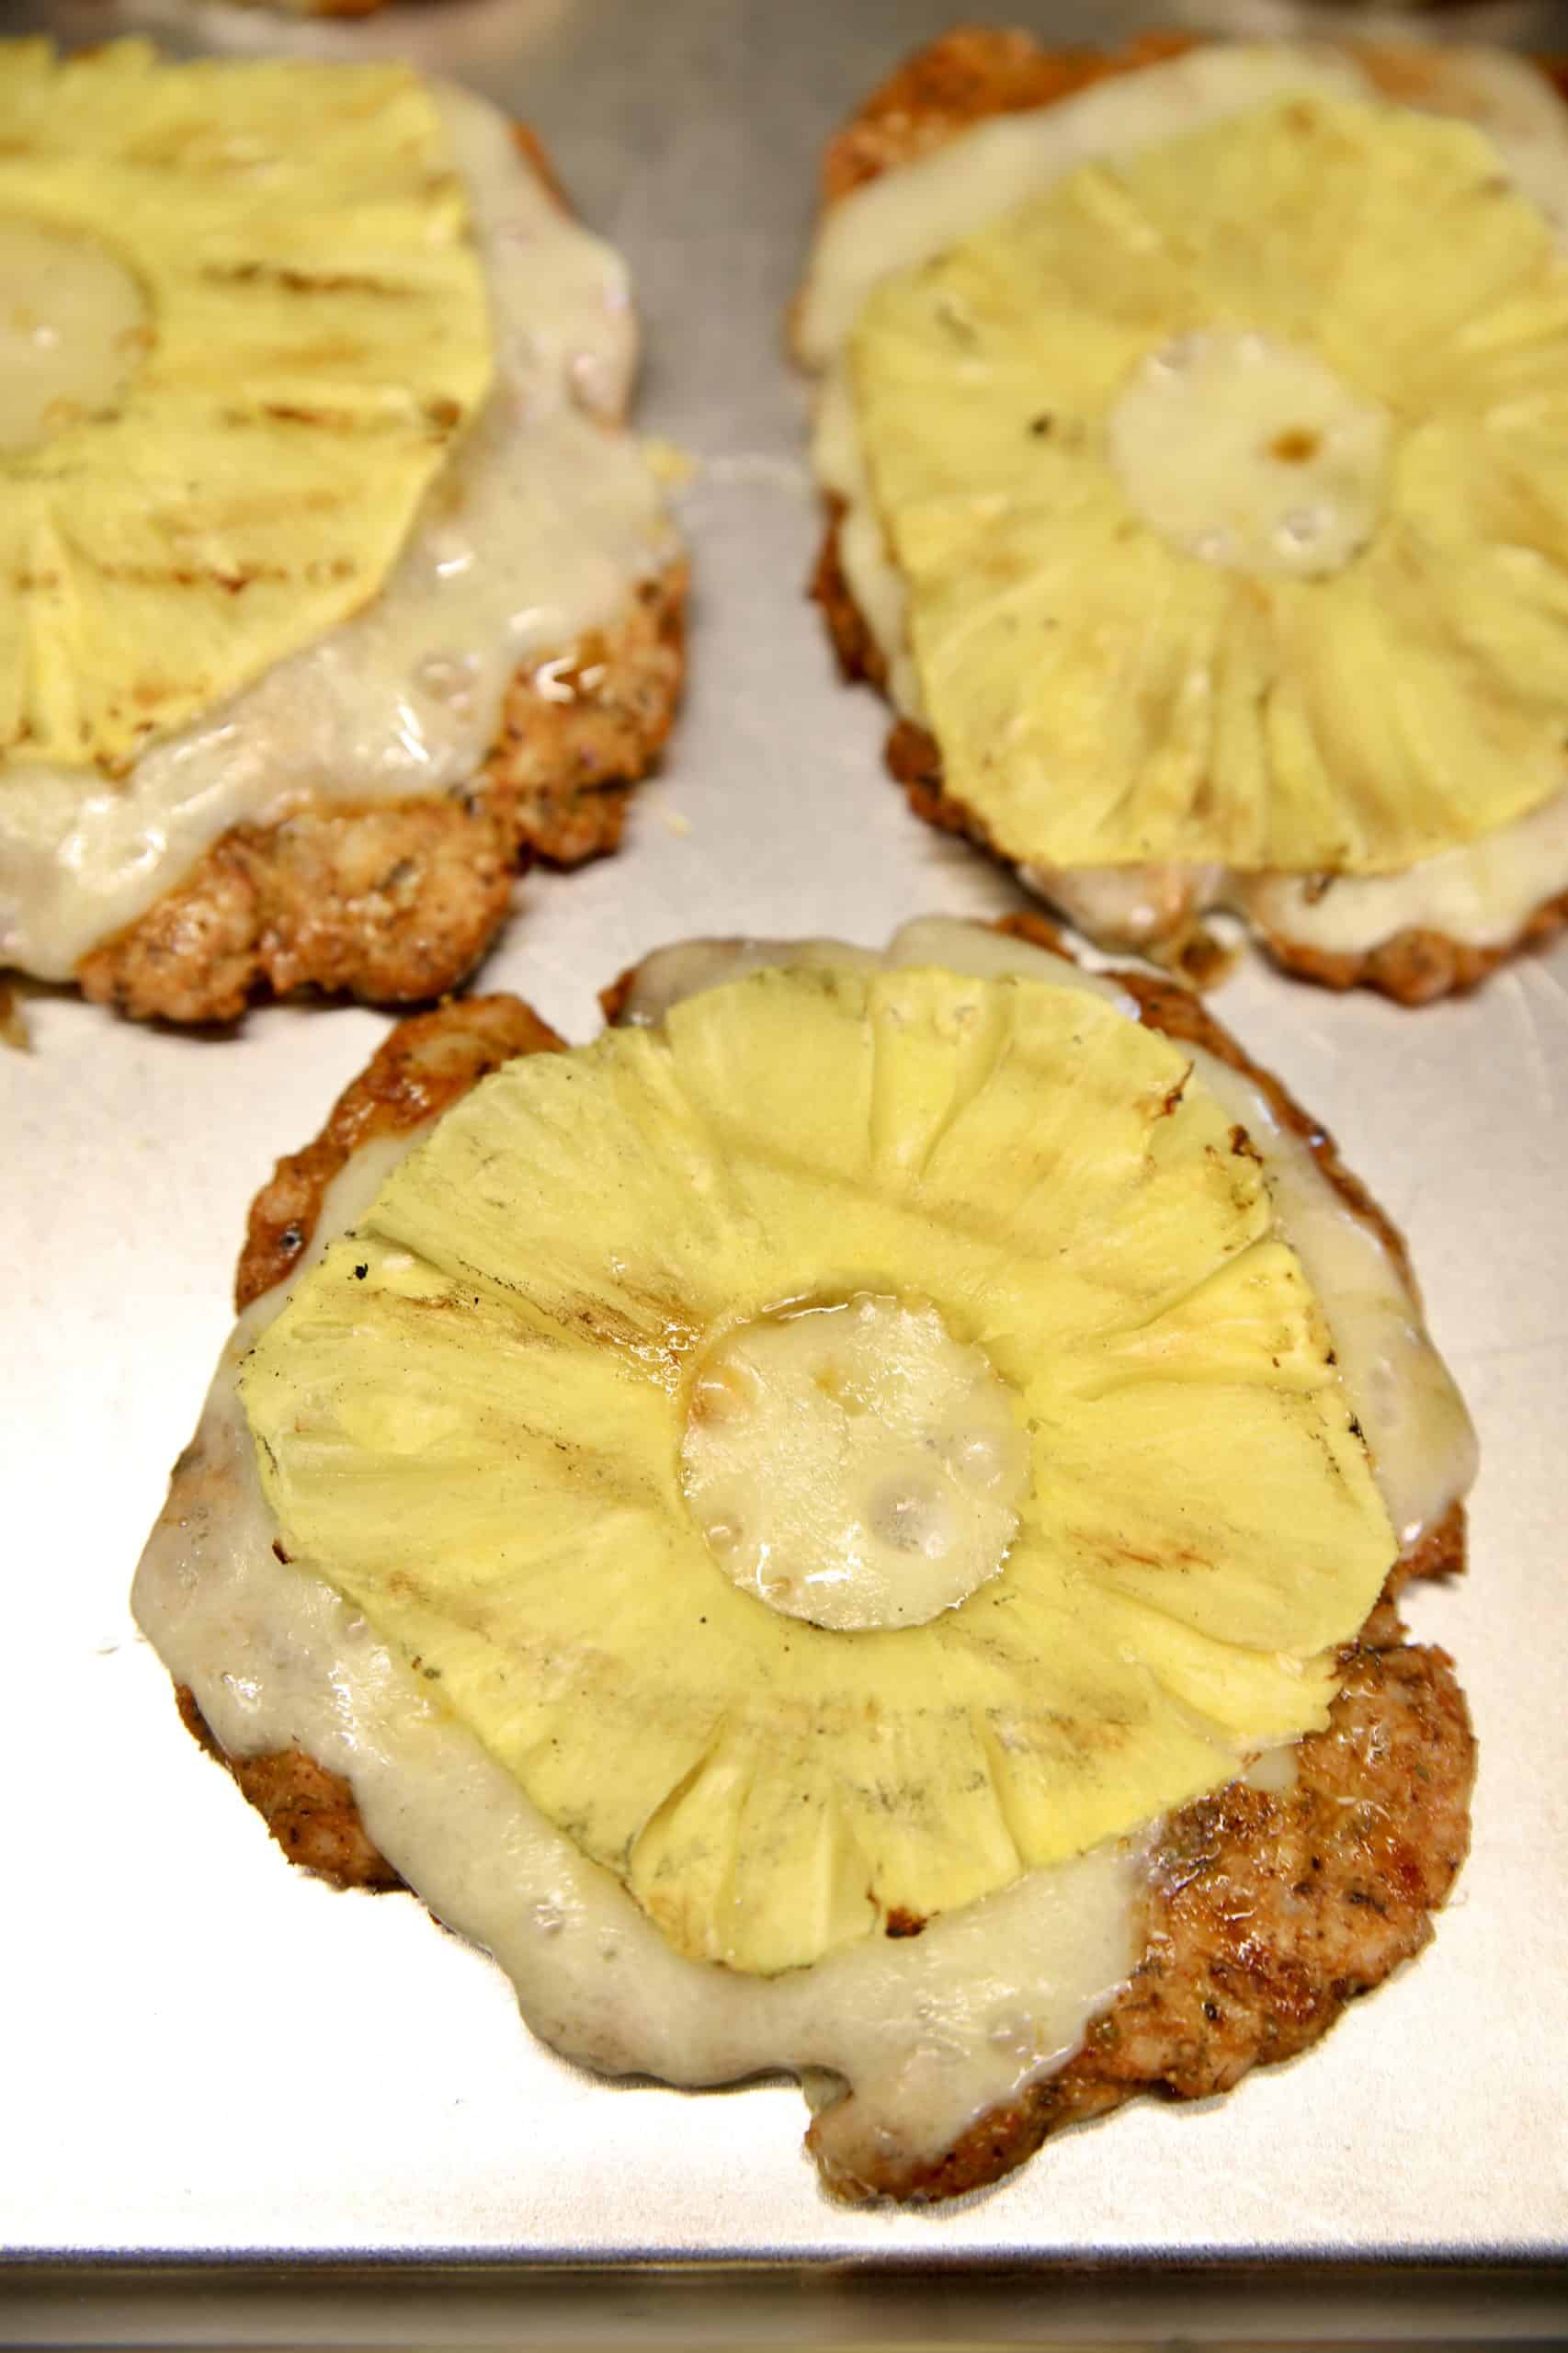 Grilled pork burgers with cheese and pineapple rings.